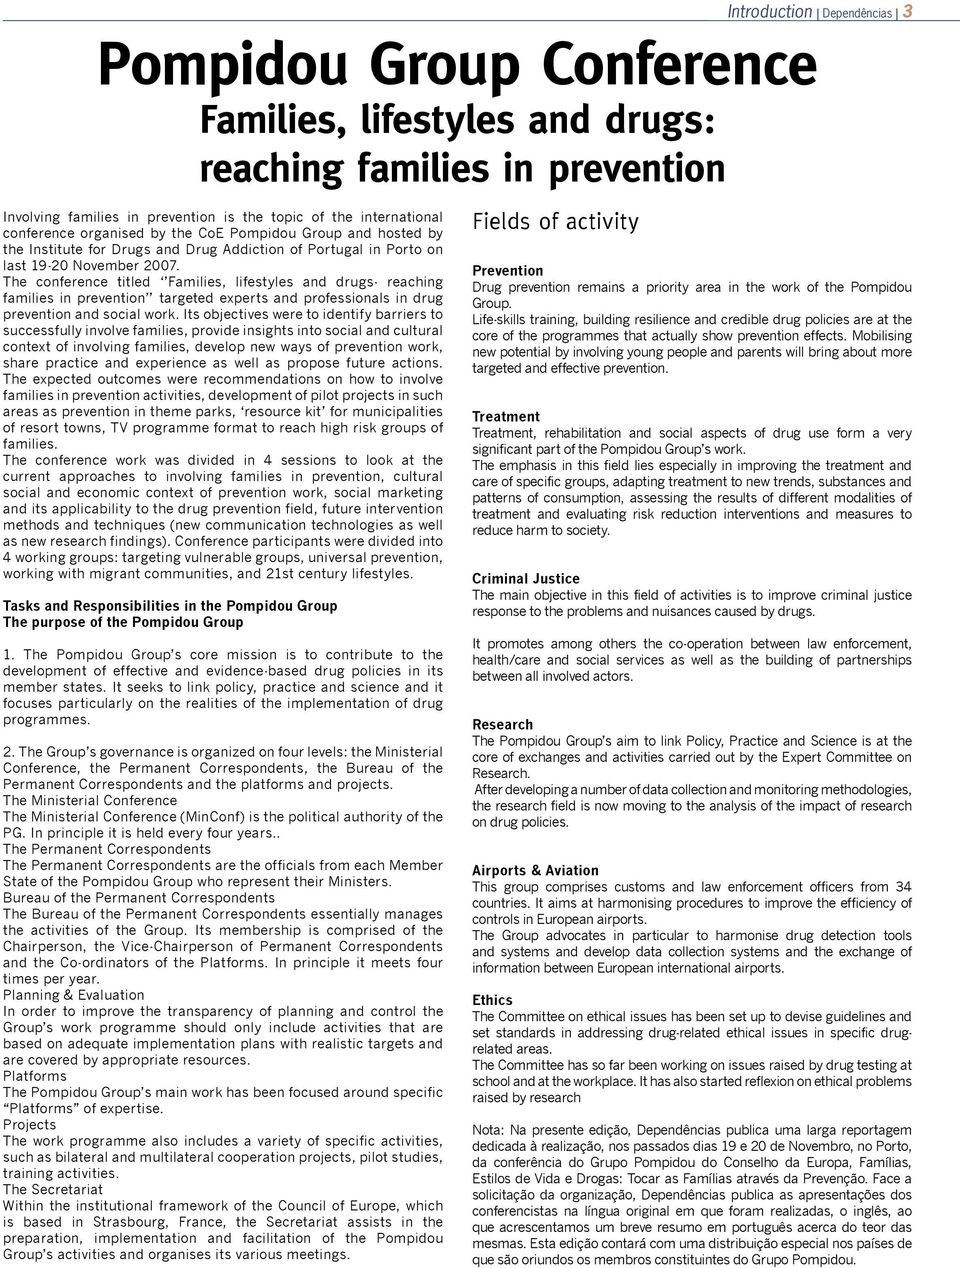 The conference titled Families, lifestyles and drugs- reaching families in prevention targeted experts and professionals in drug prevention and social work.